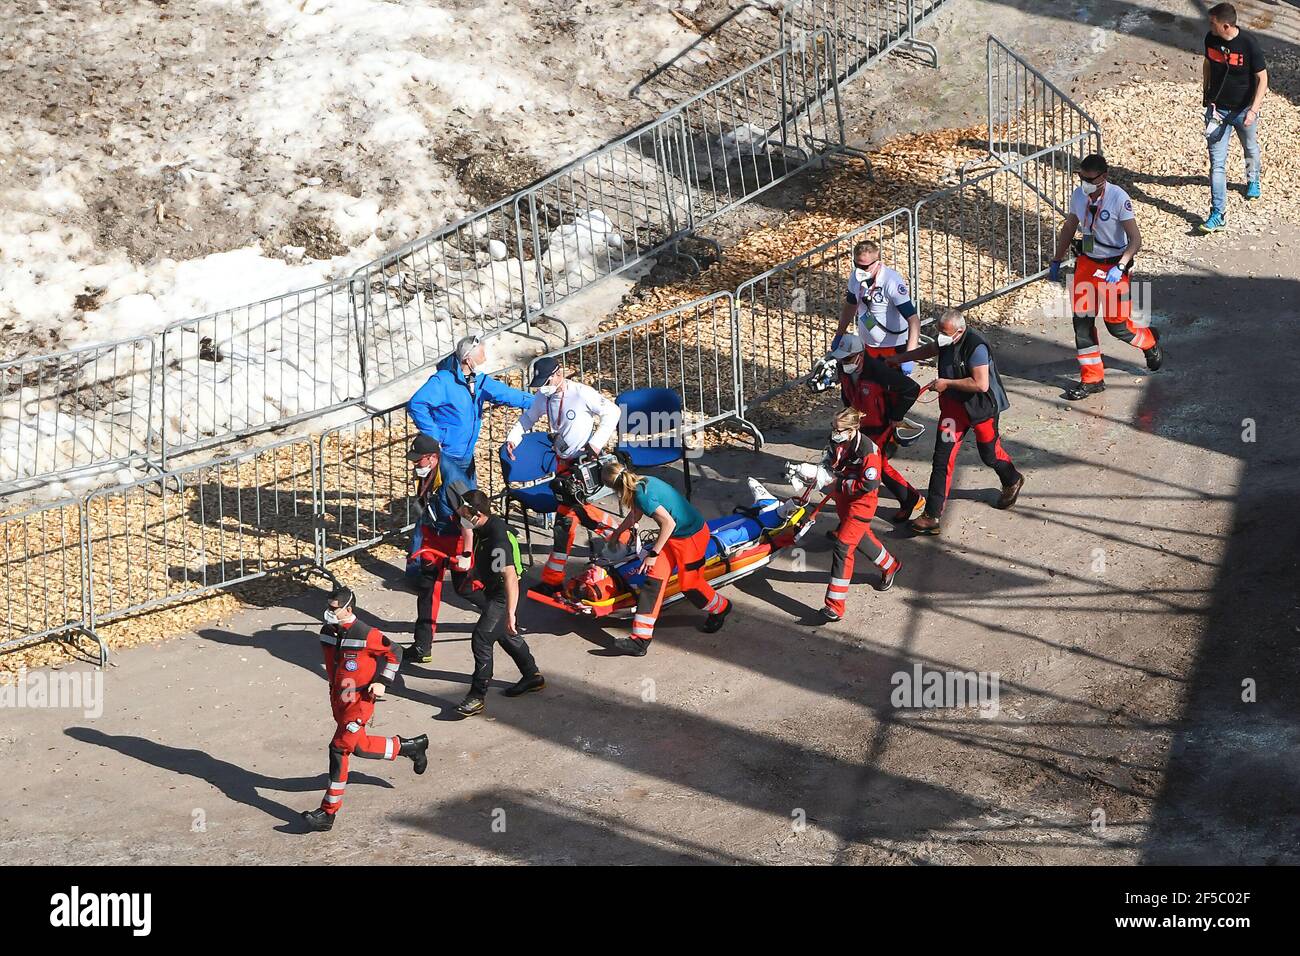 Medical staff provide assistance to Daniel Andre Tande of Norway after he crashes during the FIS Ski Jumping World Cup Flying Hill Individual competition in Planica. Stock Photo